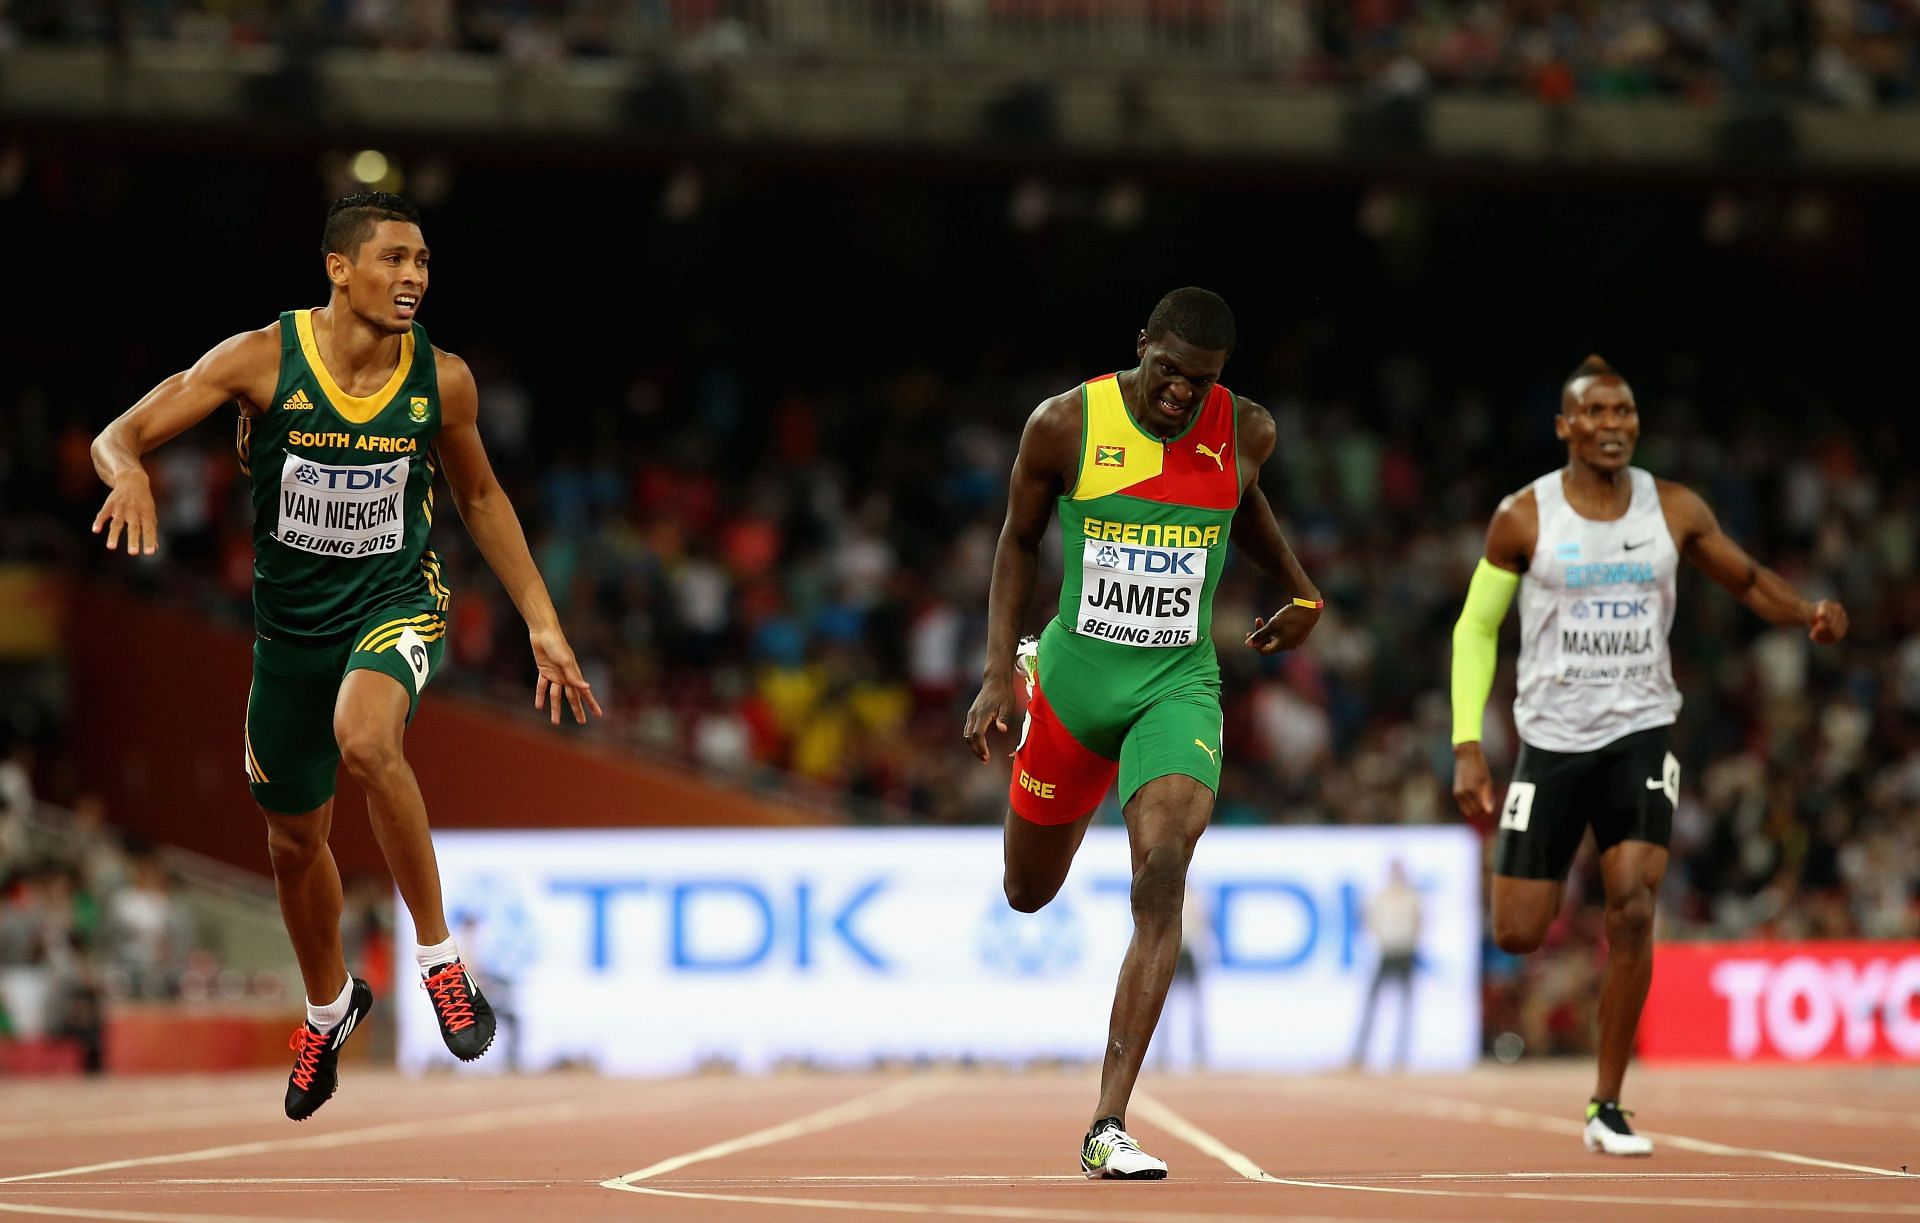  (L) Kirani James (C) in action at the World Athletics Championships 2015. (Photo by Patrick Smith/Getty Images)